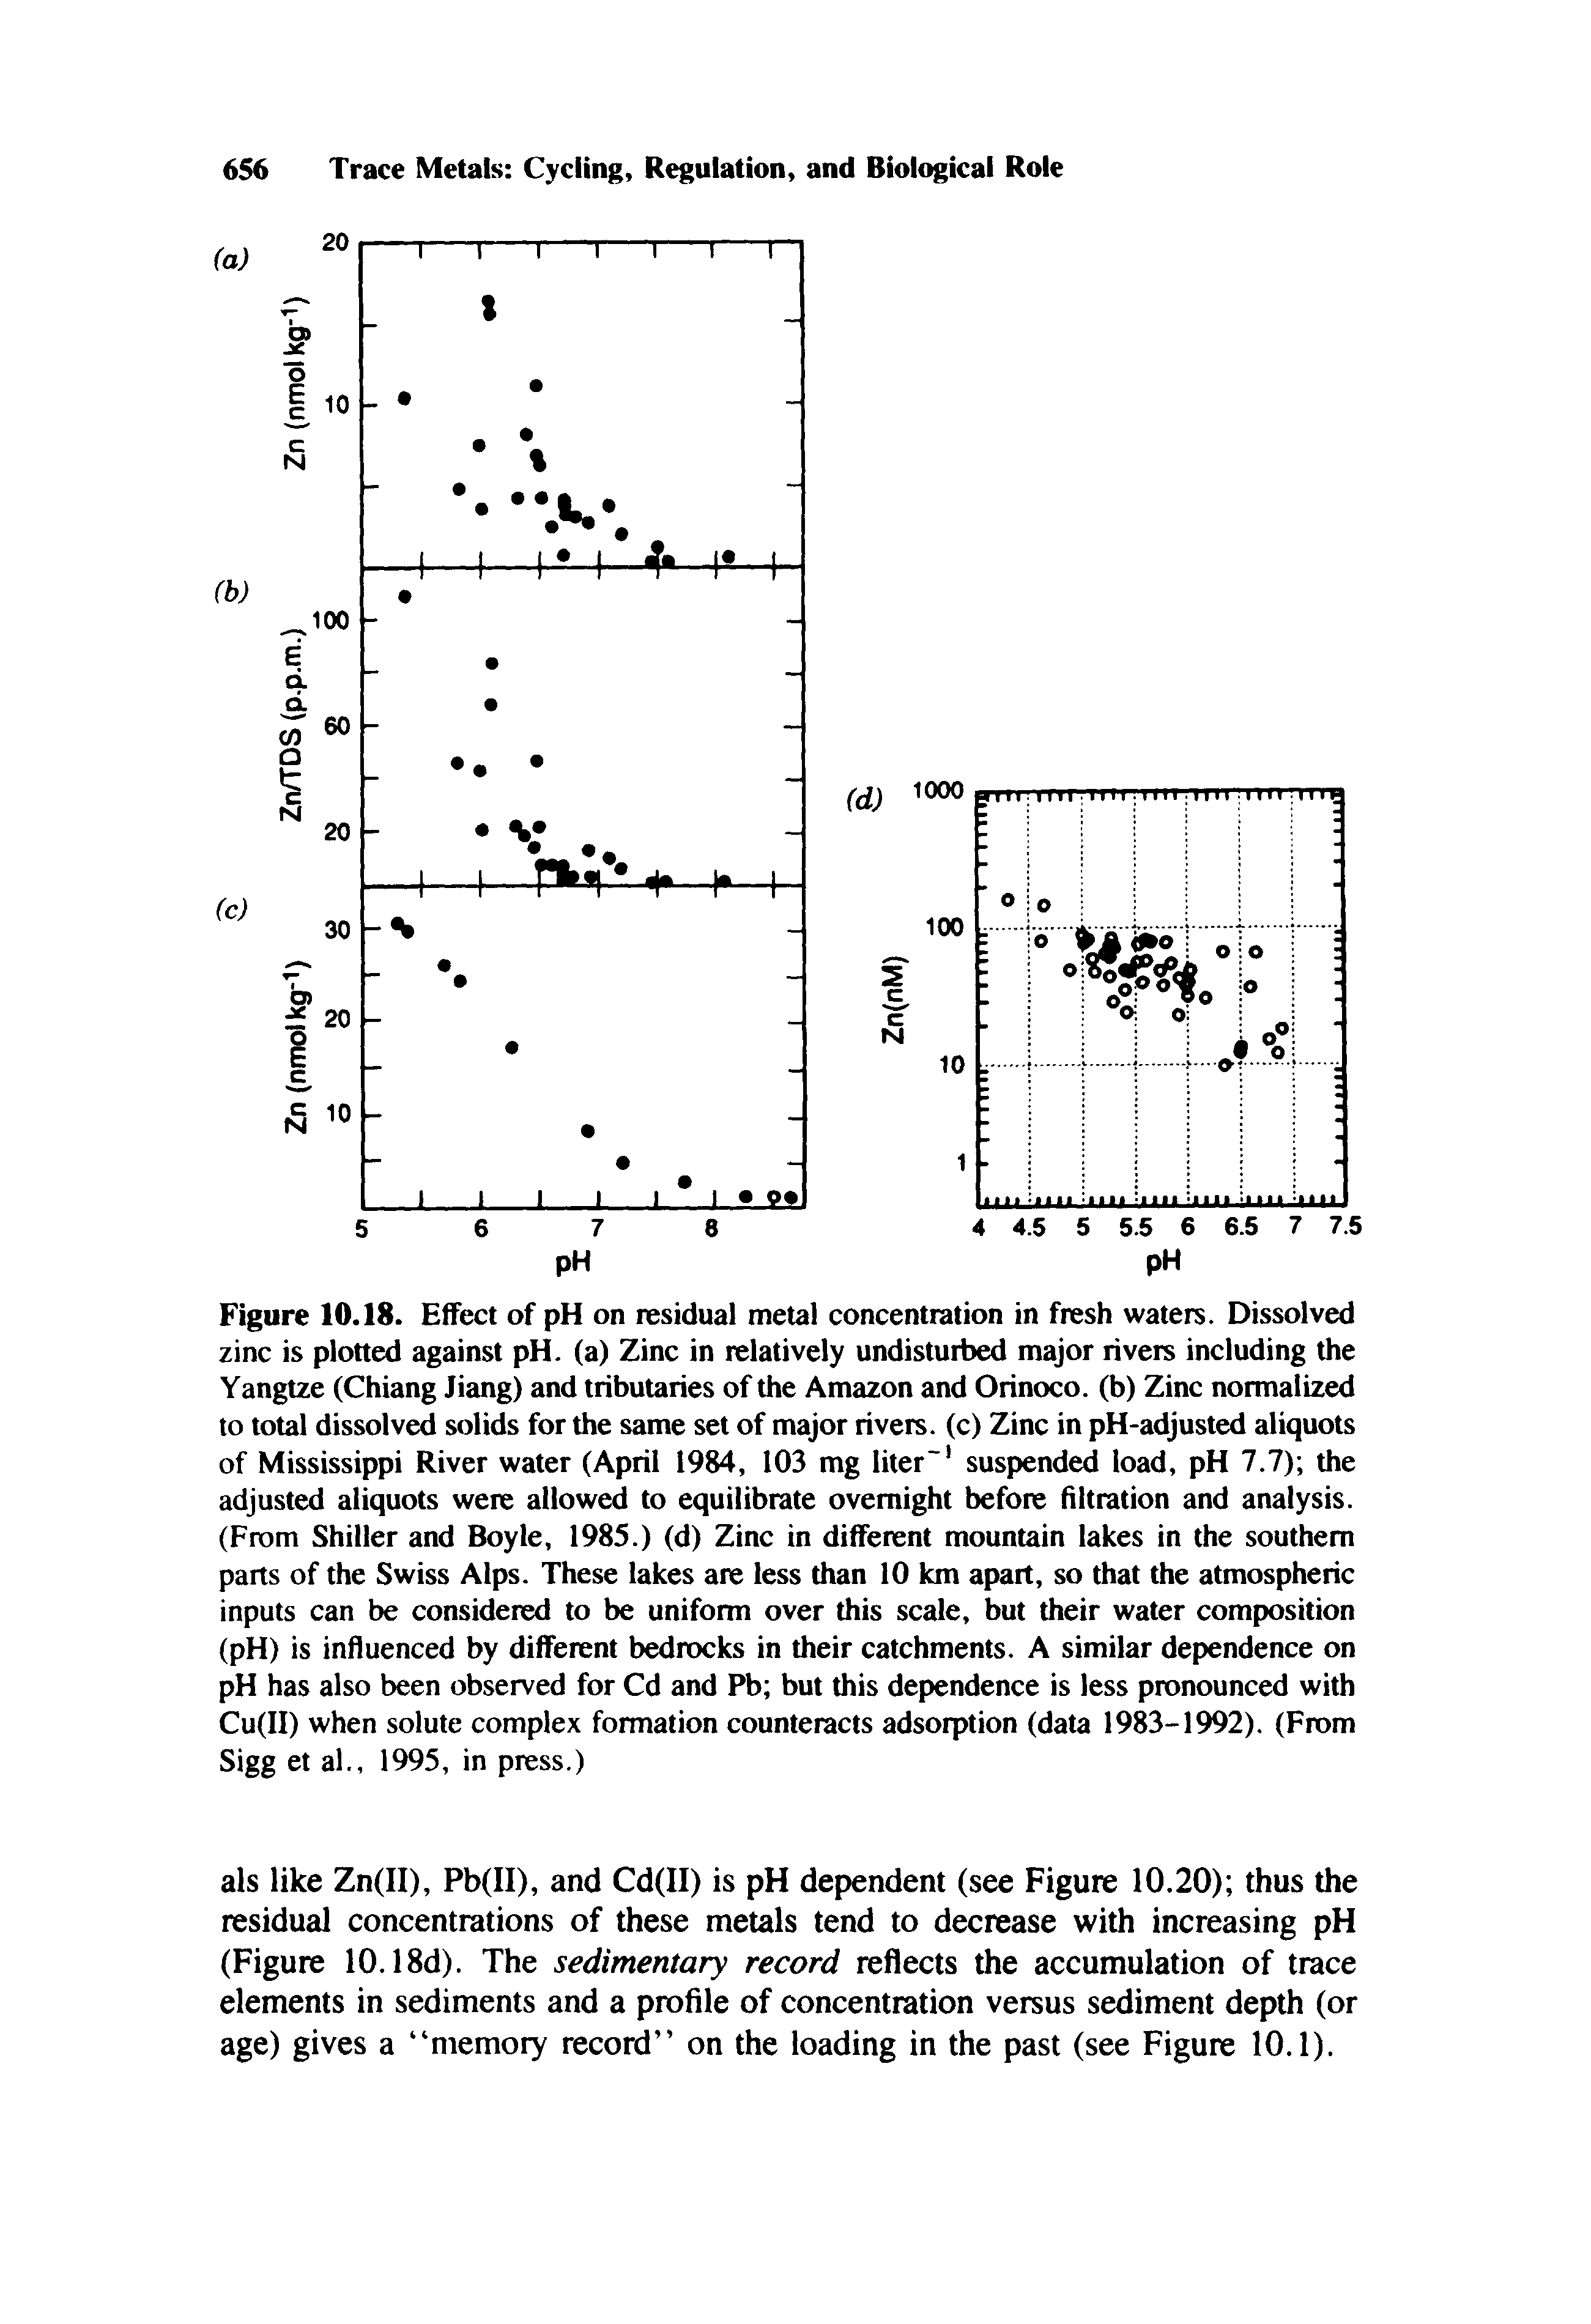 Figure 10.18. Effect of pH on residual metal concentration in fresh waters. Dissolved zinc is plotted against pH. (a) Zinc in relatively undisturbed major rivers including the Yangtze (Chiang Jiang) and tributaries of the Amazon and Orinoco, (b) Zinc normalized to total dissolved solids for the same set of major rivers, (c) Zinc in pH-adjusted aliquots of Mississippi River water (April 1984, 103 mg liter suspended load, pH 7.7) the adjusted aliquots were allowed to equilibrate overnight before filtration and analysis. (From Shiller and Boyle, 1985.) (d) Zinc in different mountain lakes in the southern parts of the Swiss Alps. These lakes are less than 10 km apait, so that the atmospheric inputs can be considered to be uniform over this scale, but their water composition (pH) is influenced by different bedrocks in their catchments. A similar dependence on pH has also been observed for Cd and Pb but this dependence is less pronounced with Cu(II) when solute complex formation counteracts adsorption (data 1983-1992). (From Sigg et al., 1995, in press.)...